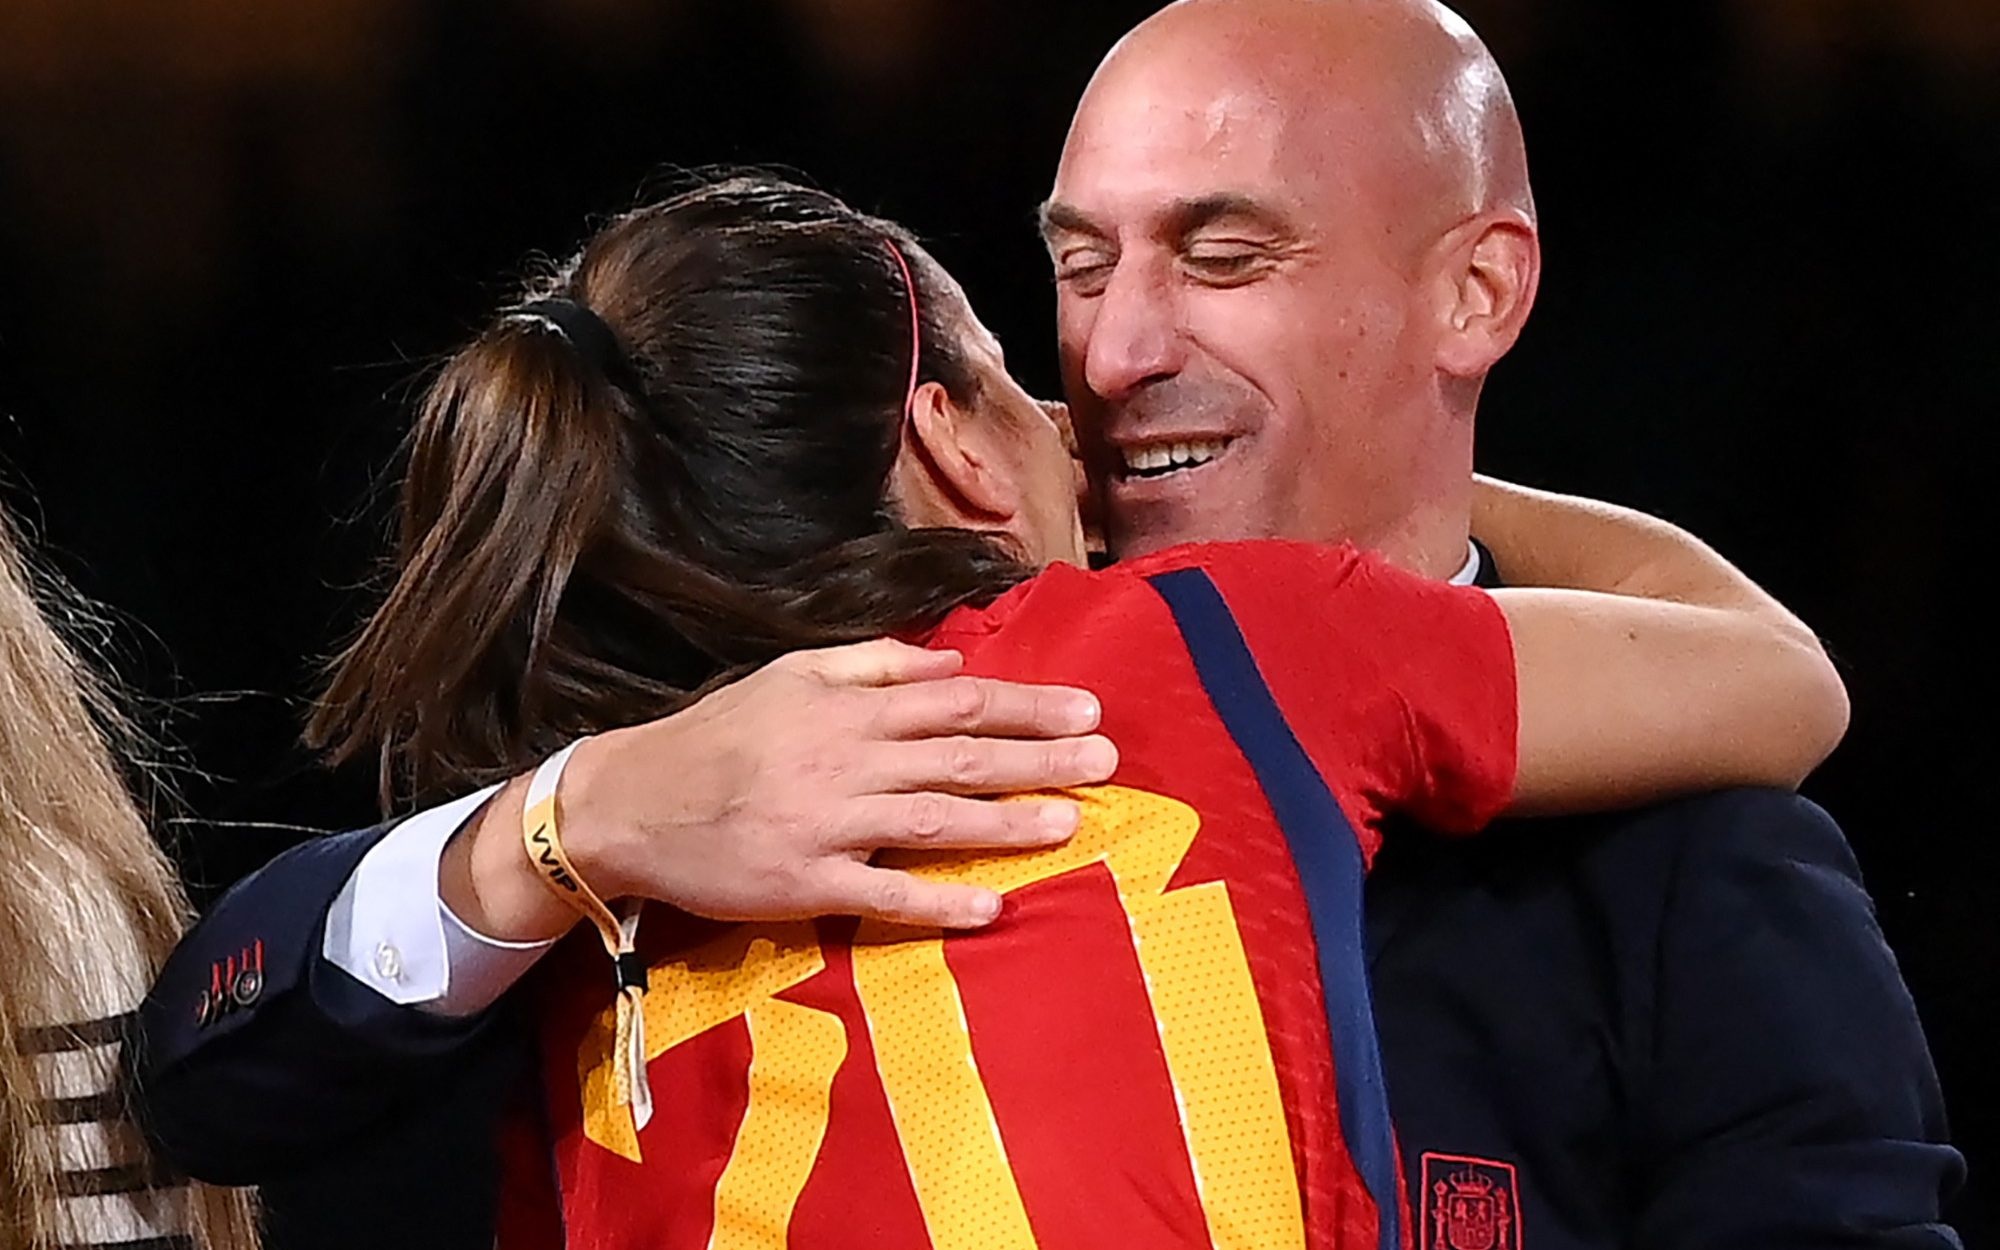 Spanish FA president, LUIS RUBIALES, to face FIFA disciplinary investigation as they open proceedings against him for kissing JENNI HERMOSO.